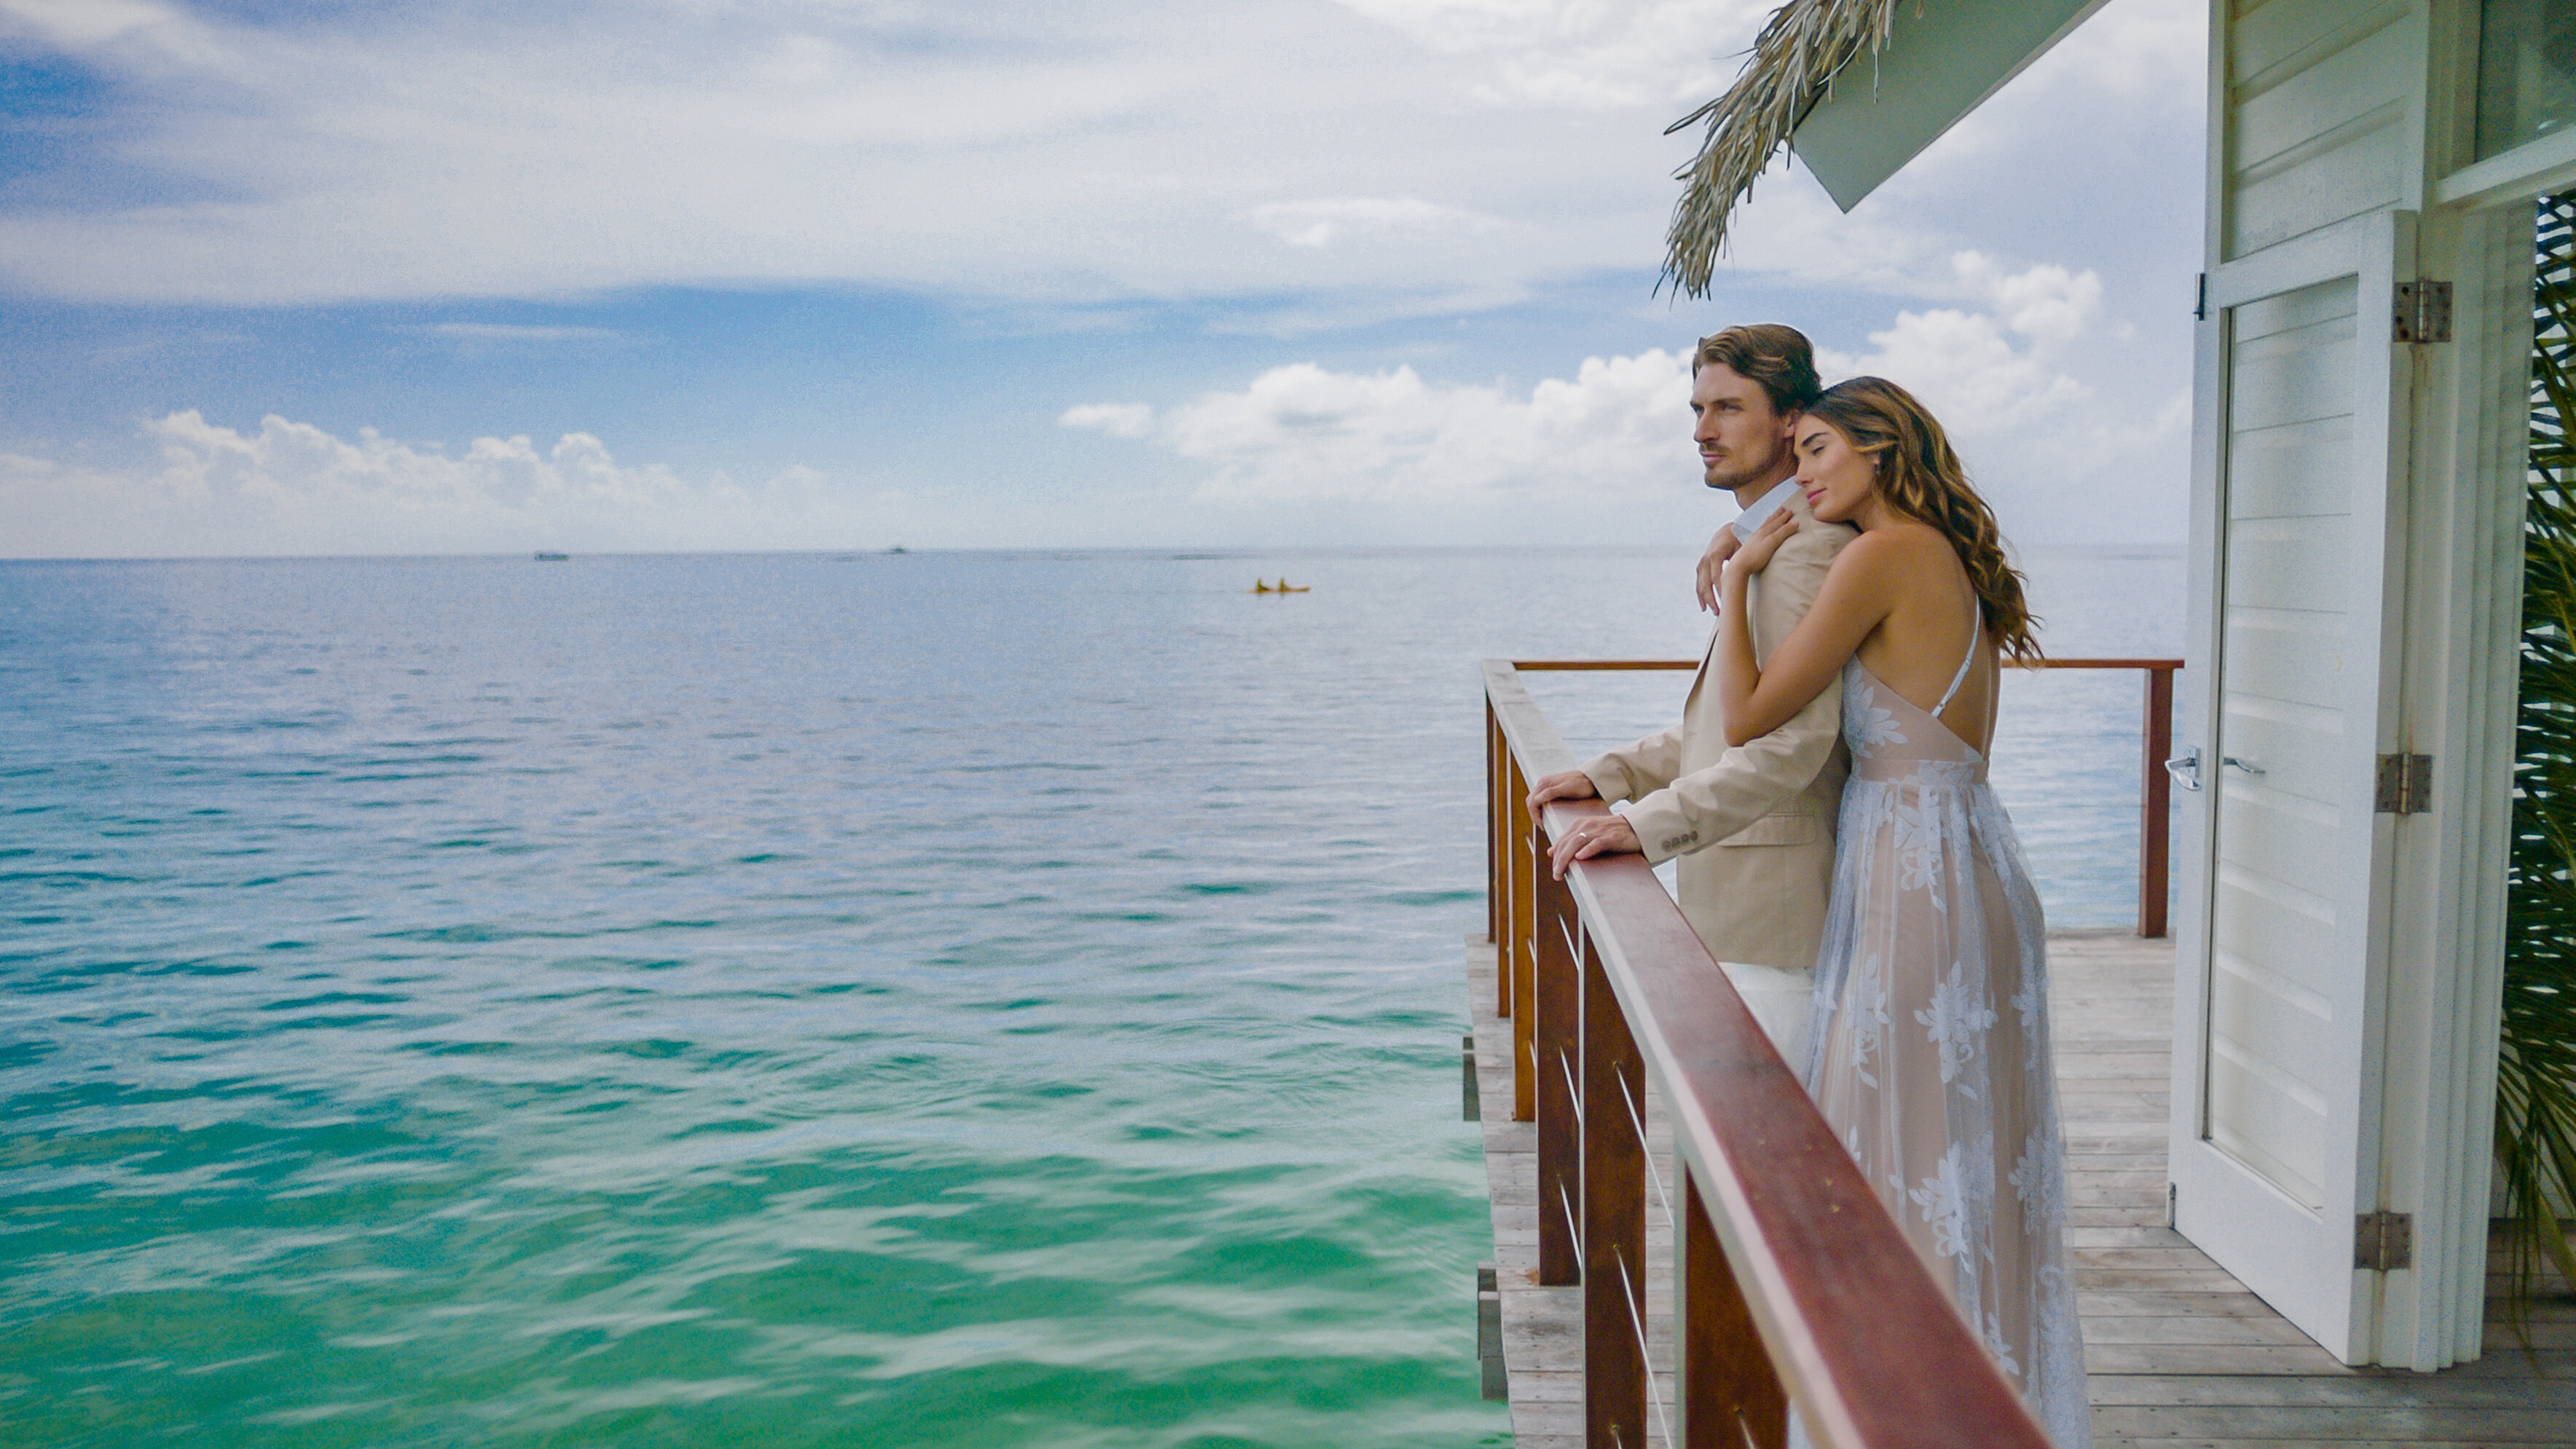 Getting Married In Jamaica: Insights From Wedding Planners